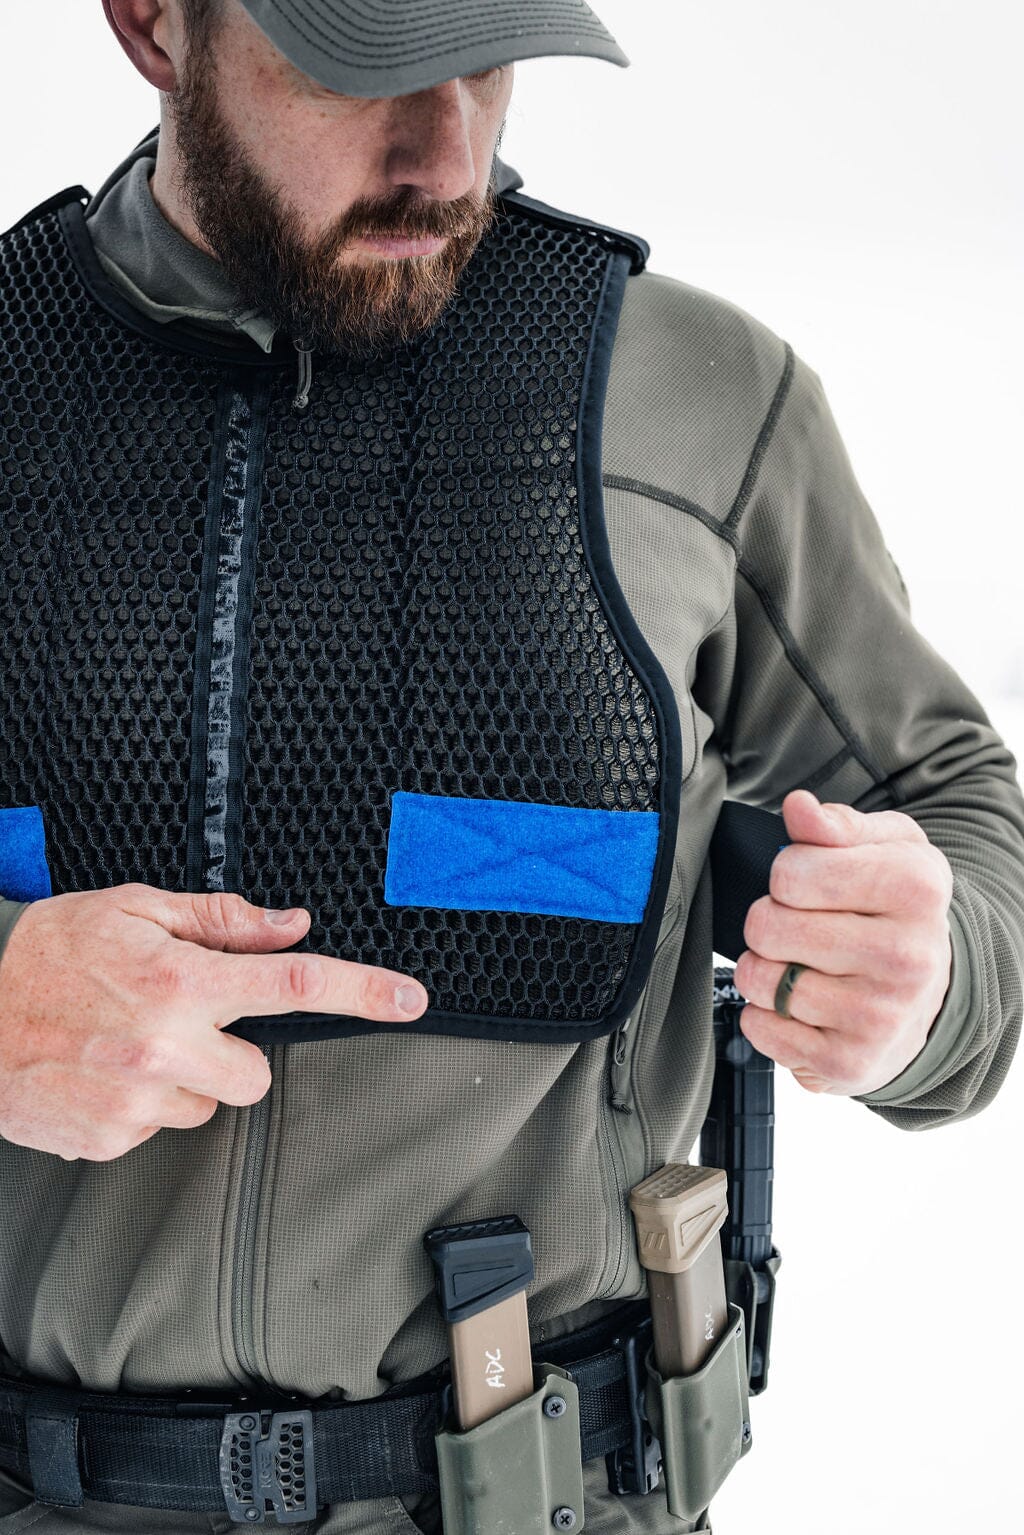 One Police Officer Invents Way to Wear Body Armor Comfortably: Part 3